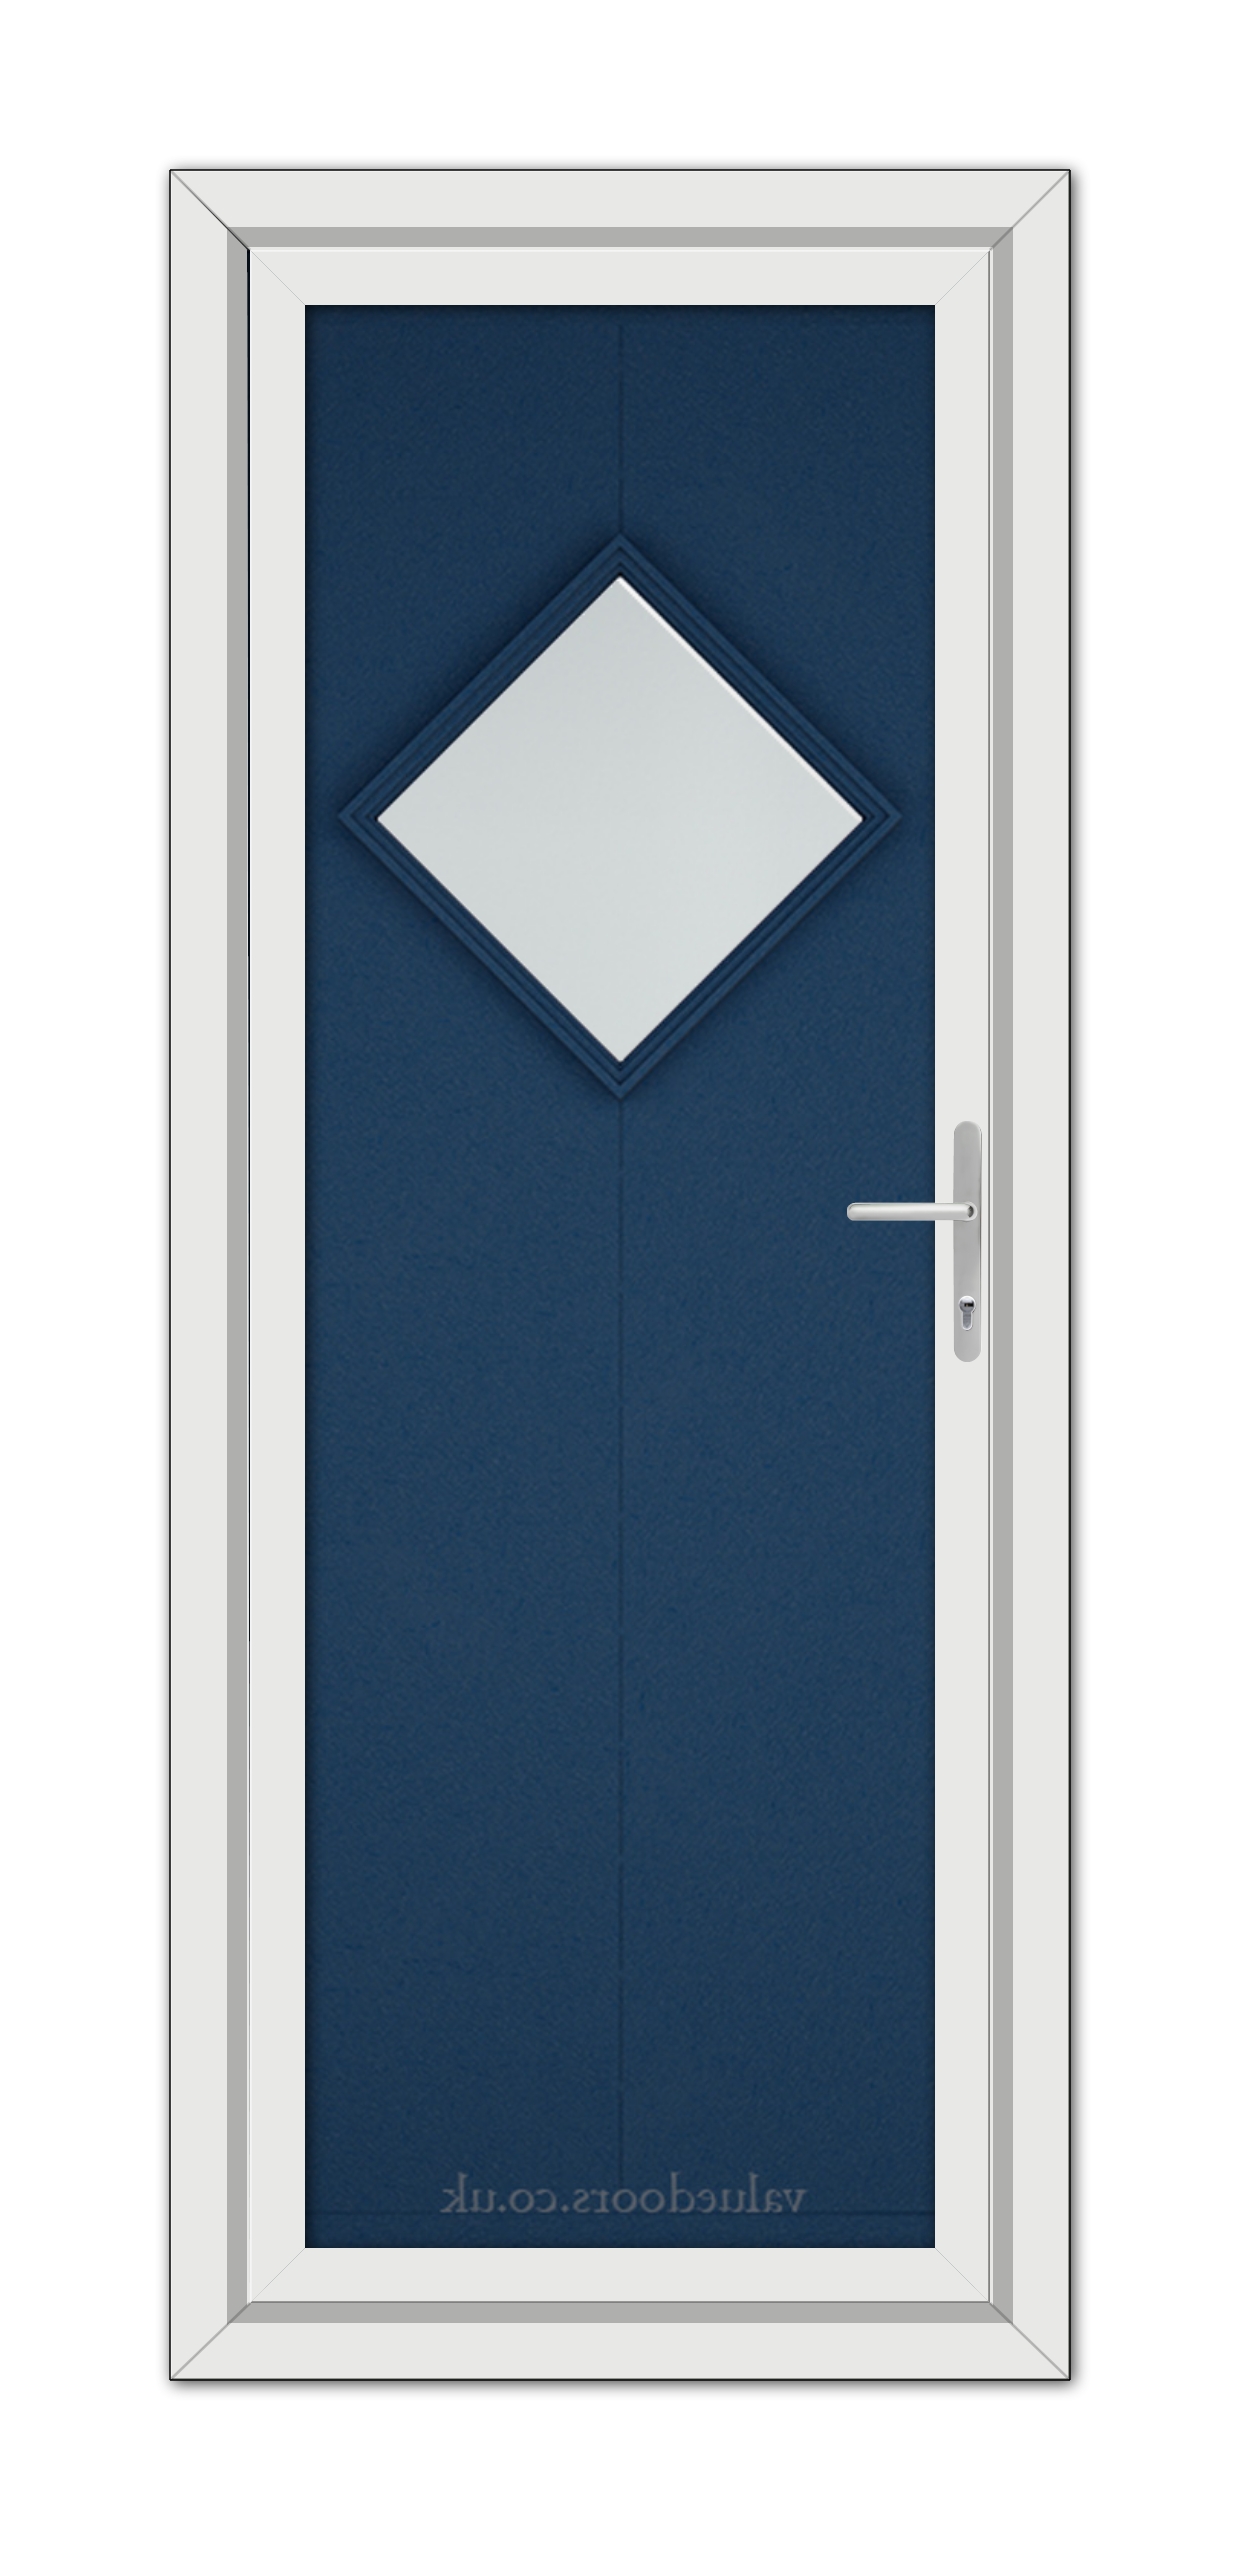 A modern Blue Hamburg uPVC door featuring a diamond-shaped window at the center, framed in white with a silver handle on the right side.